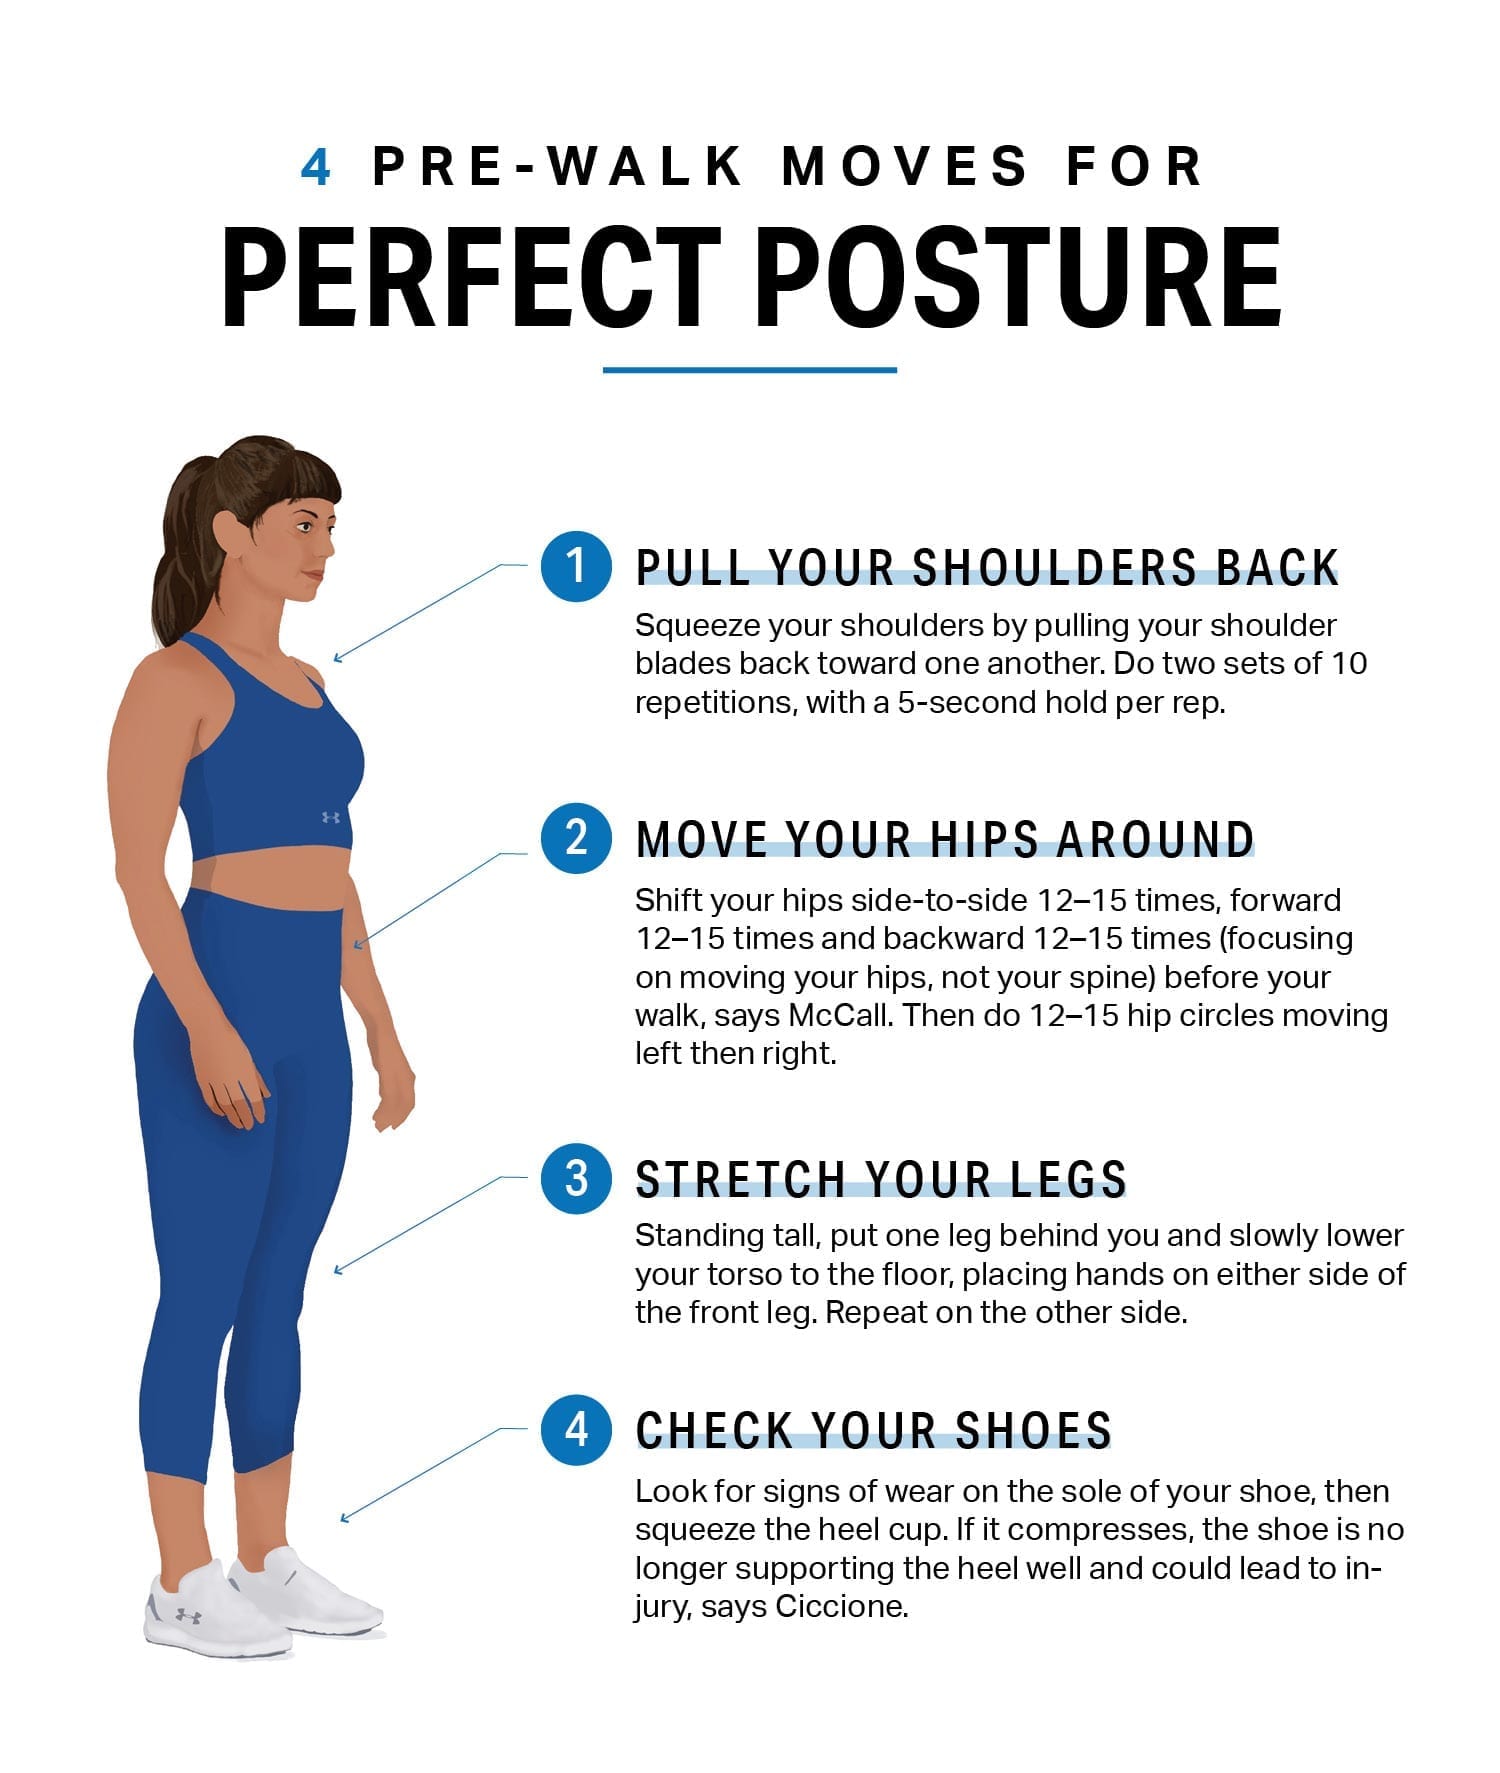 5 Signs of Bad Posture